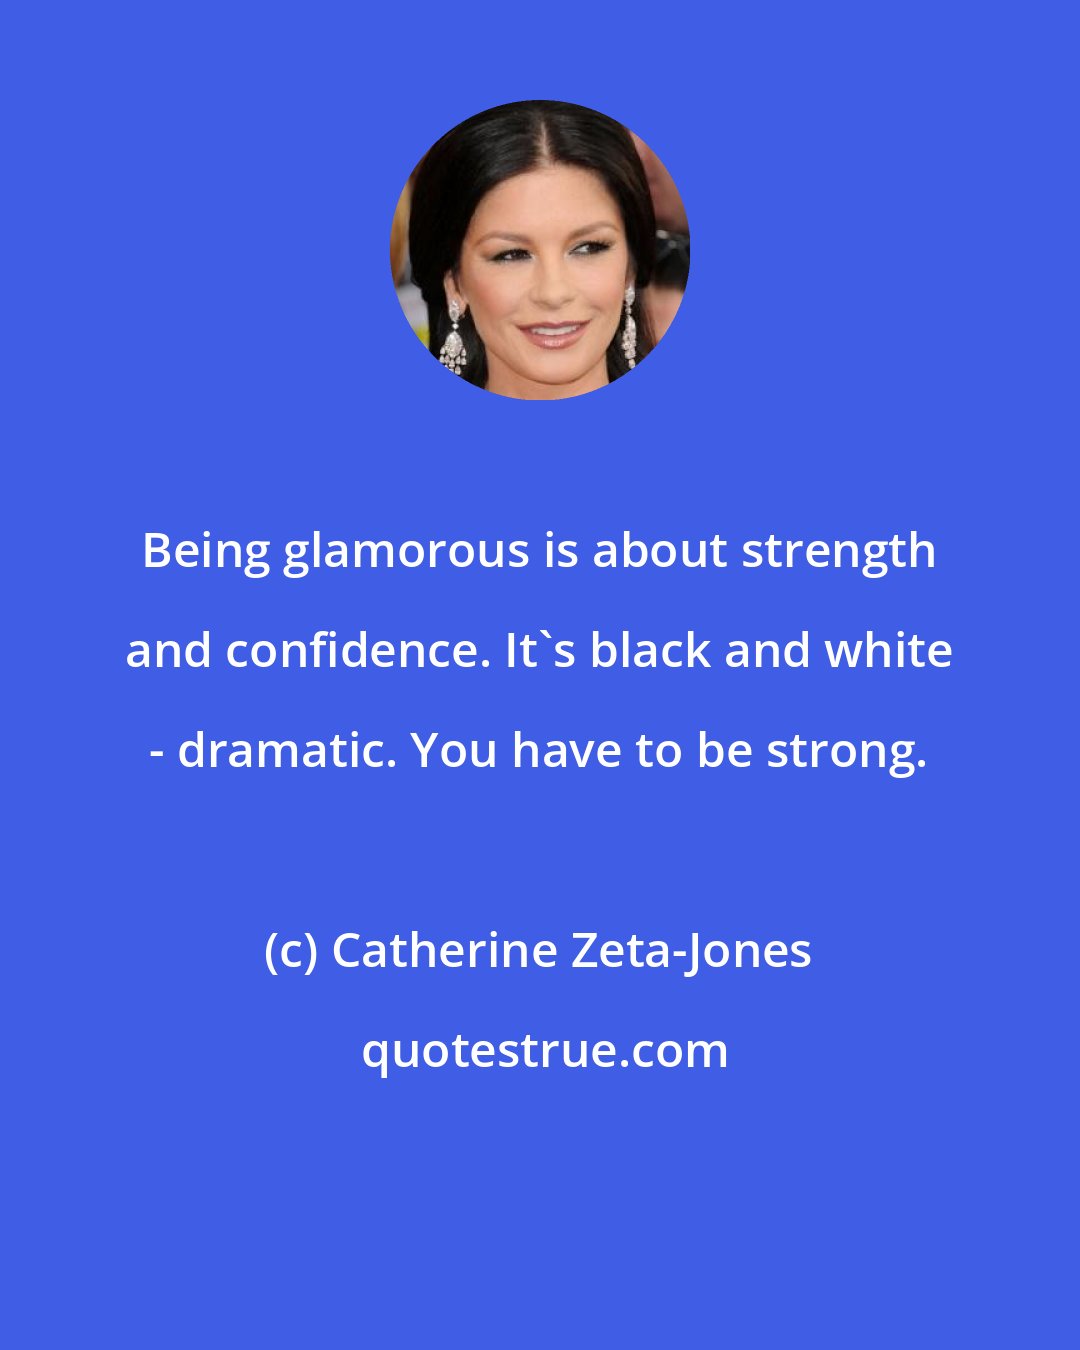 Catherine Zeta-Jones: Being glamorous is about strength and confidence. It's black and white - dramatic. You have to be strong.